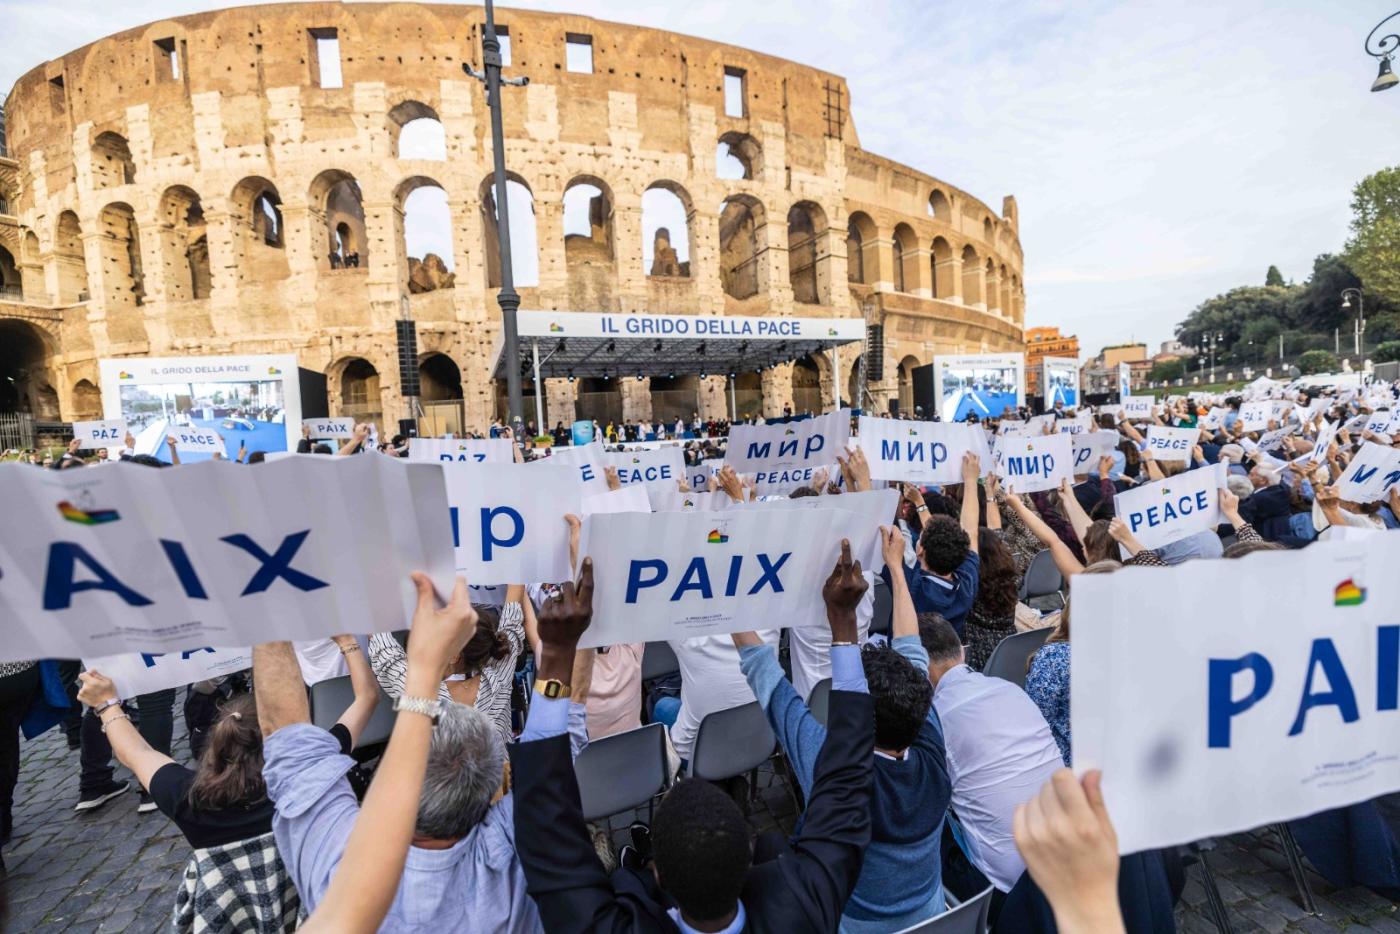 26 October, Rome, “The Cry for Peace” final ceremony.